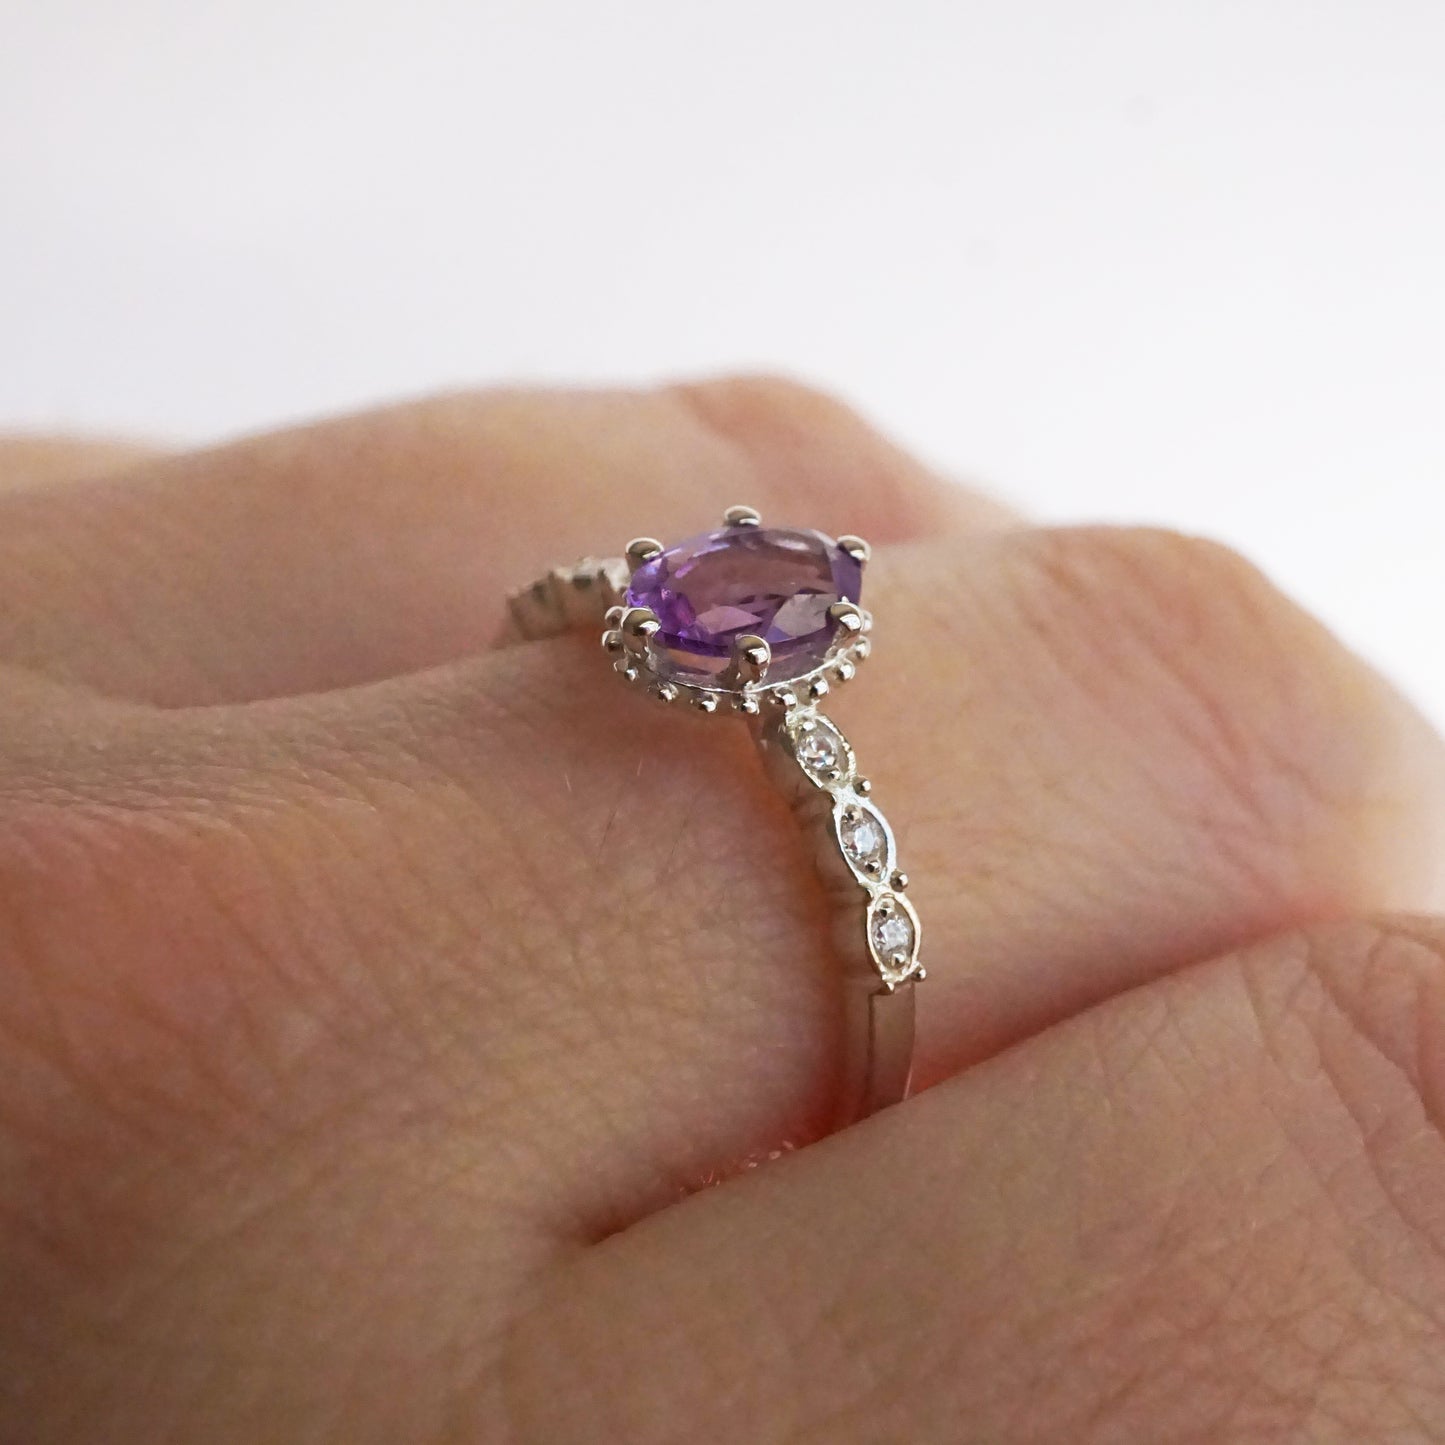 Juliet Ring - Amethyst and White Topaz